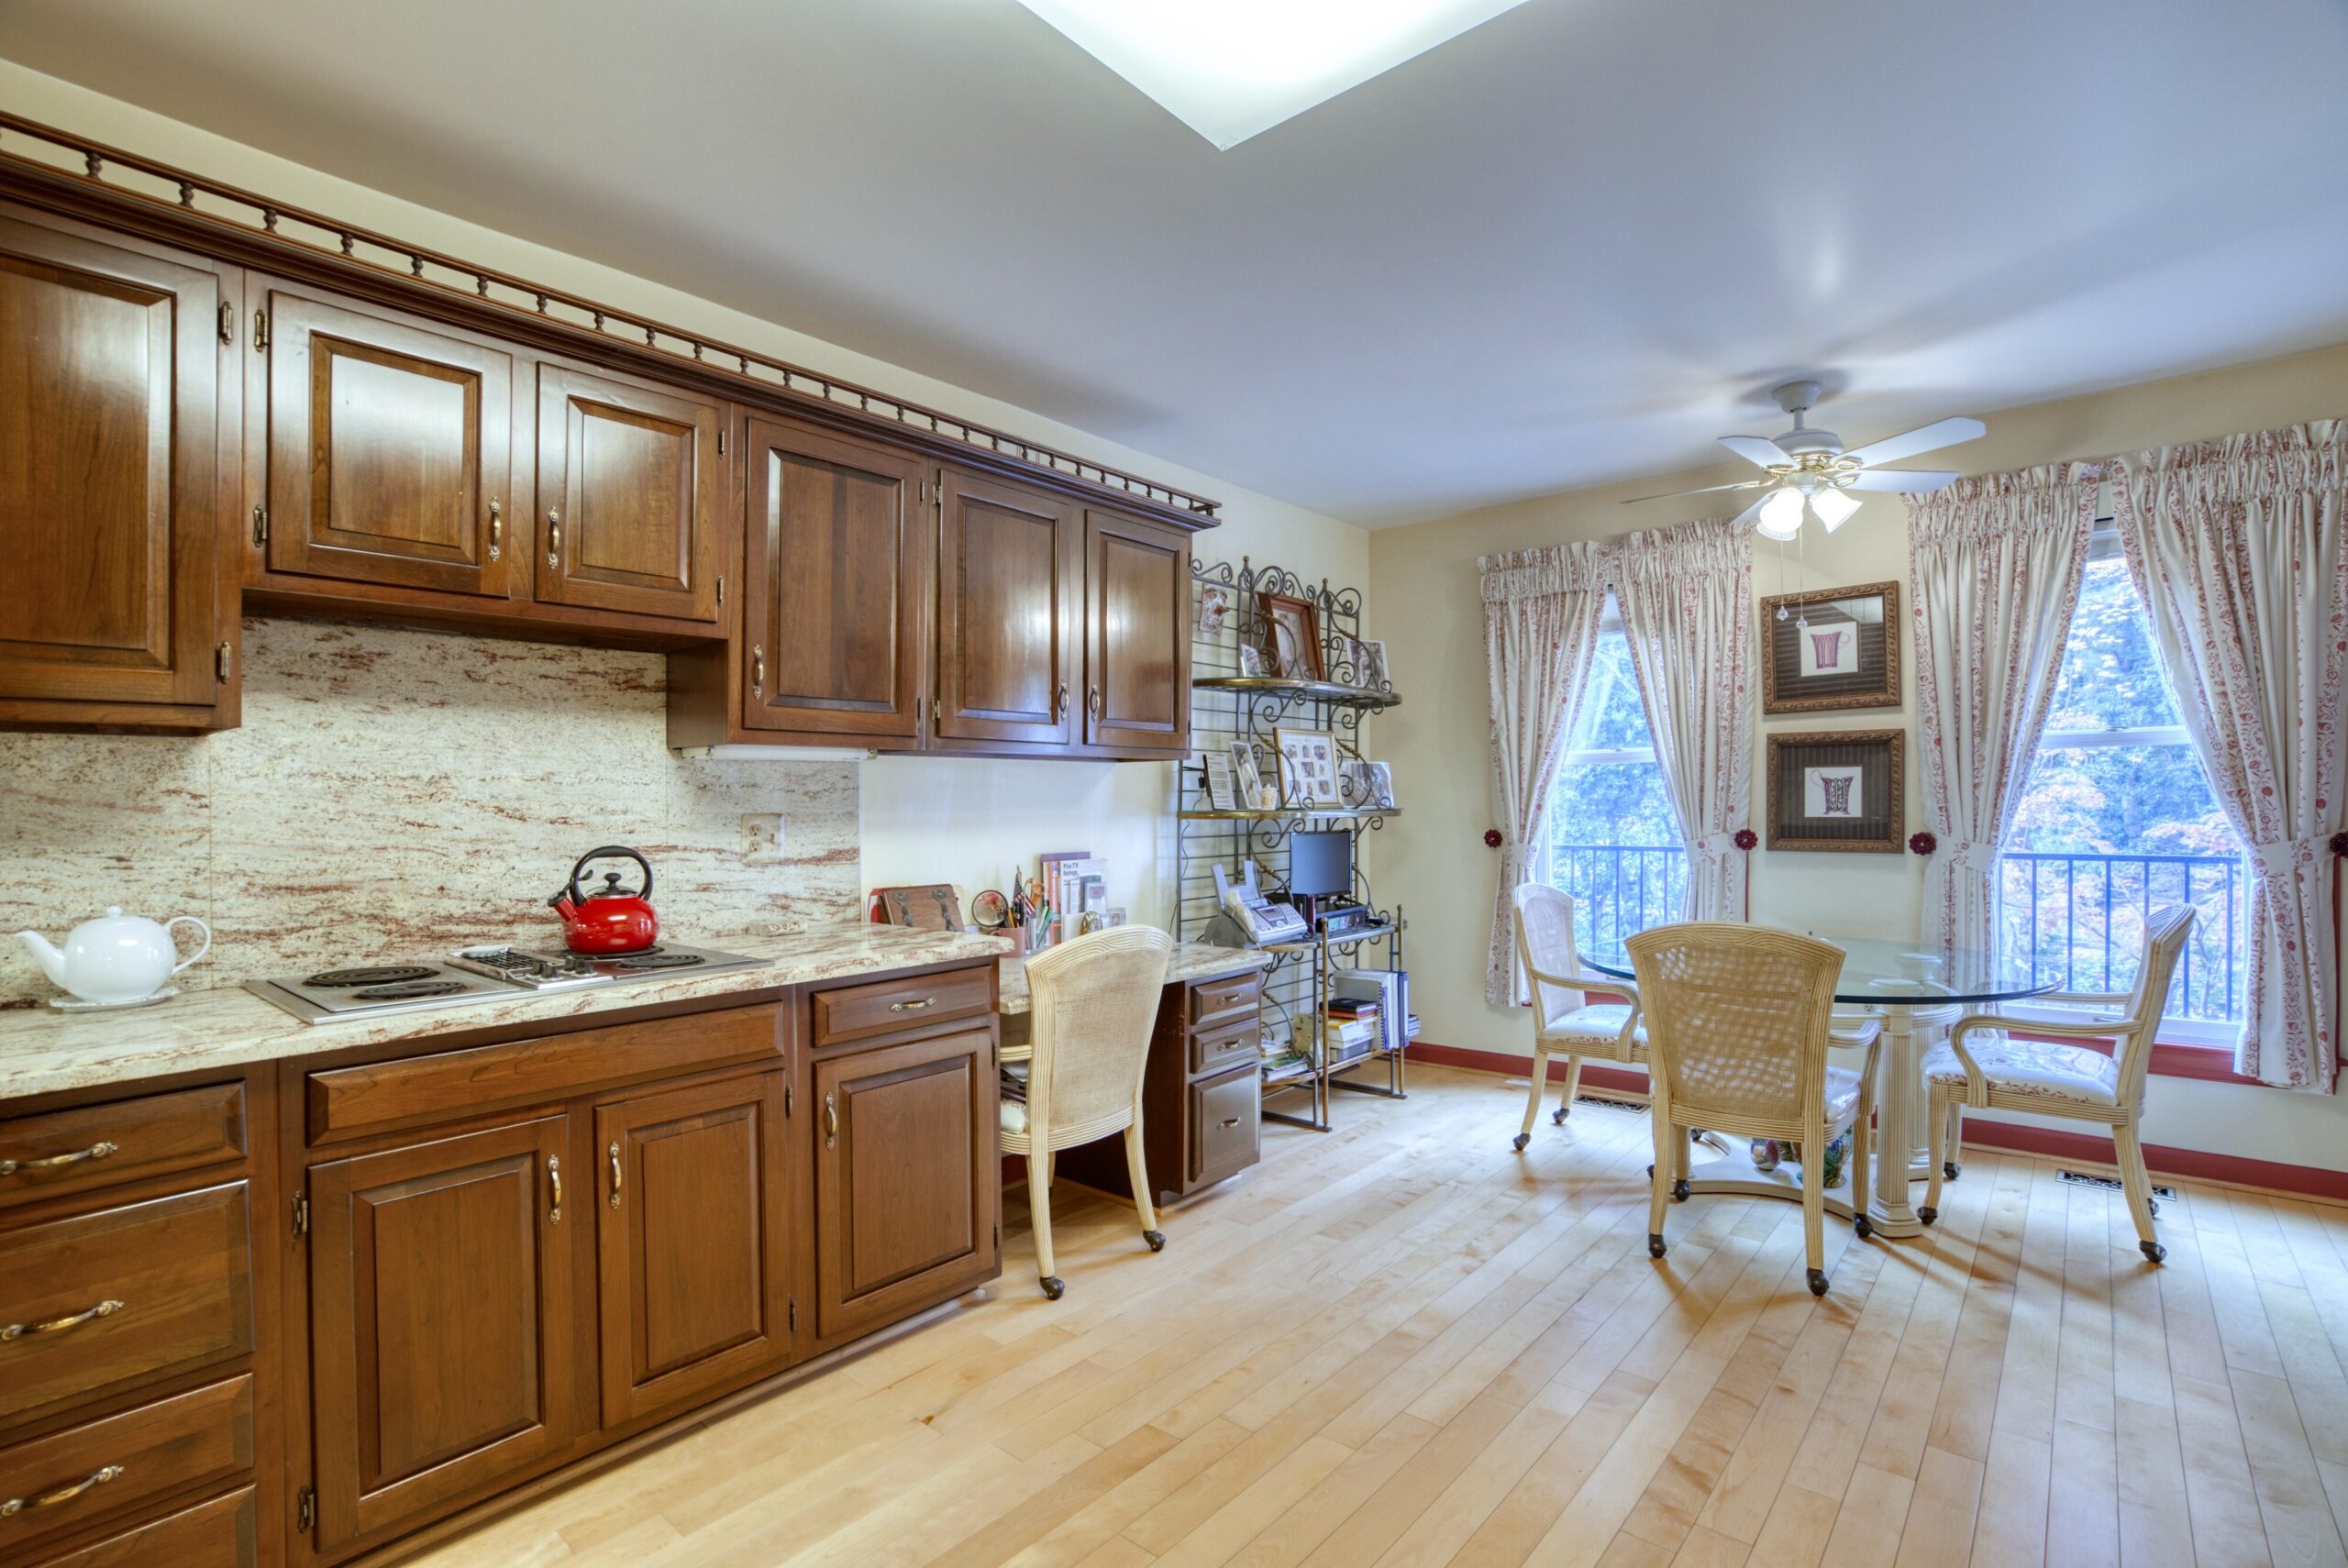 Interior professional photo of 1324 Skipwith Road - showing half of the kitchen with dark wooden cabinets and breakfast table